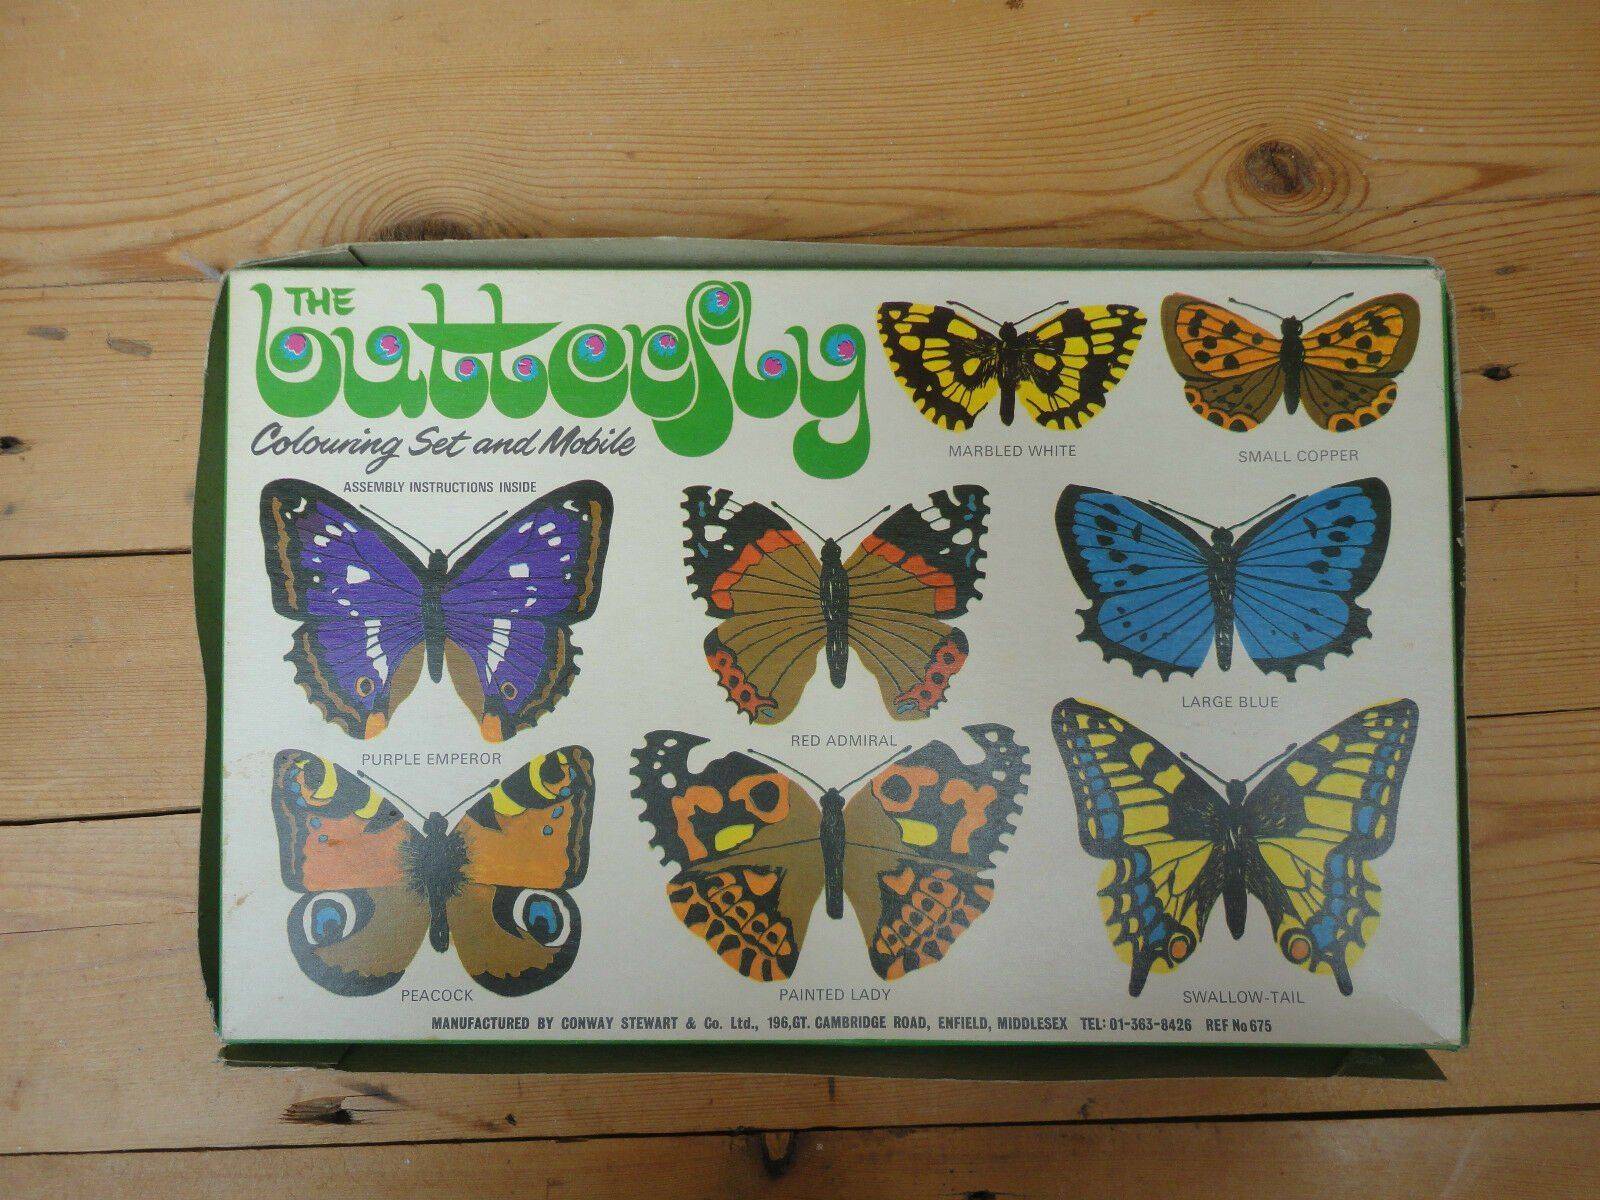 Conway Stewart The Butterfly Colouring Set and Mobile Toy 5.jpg